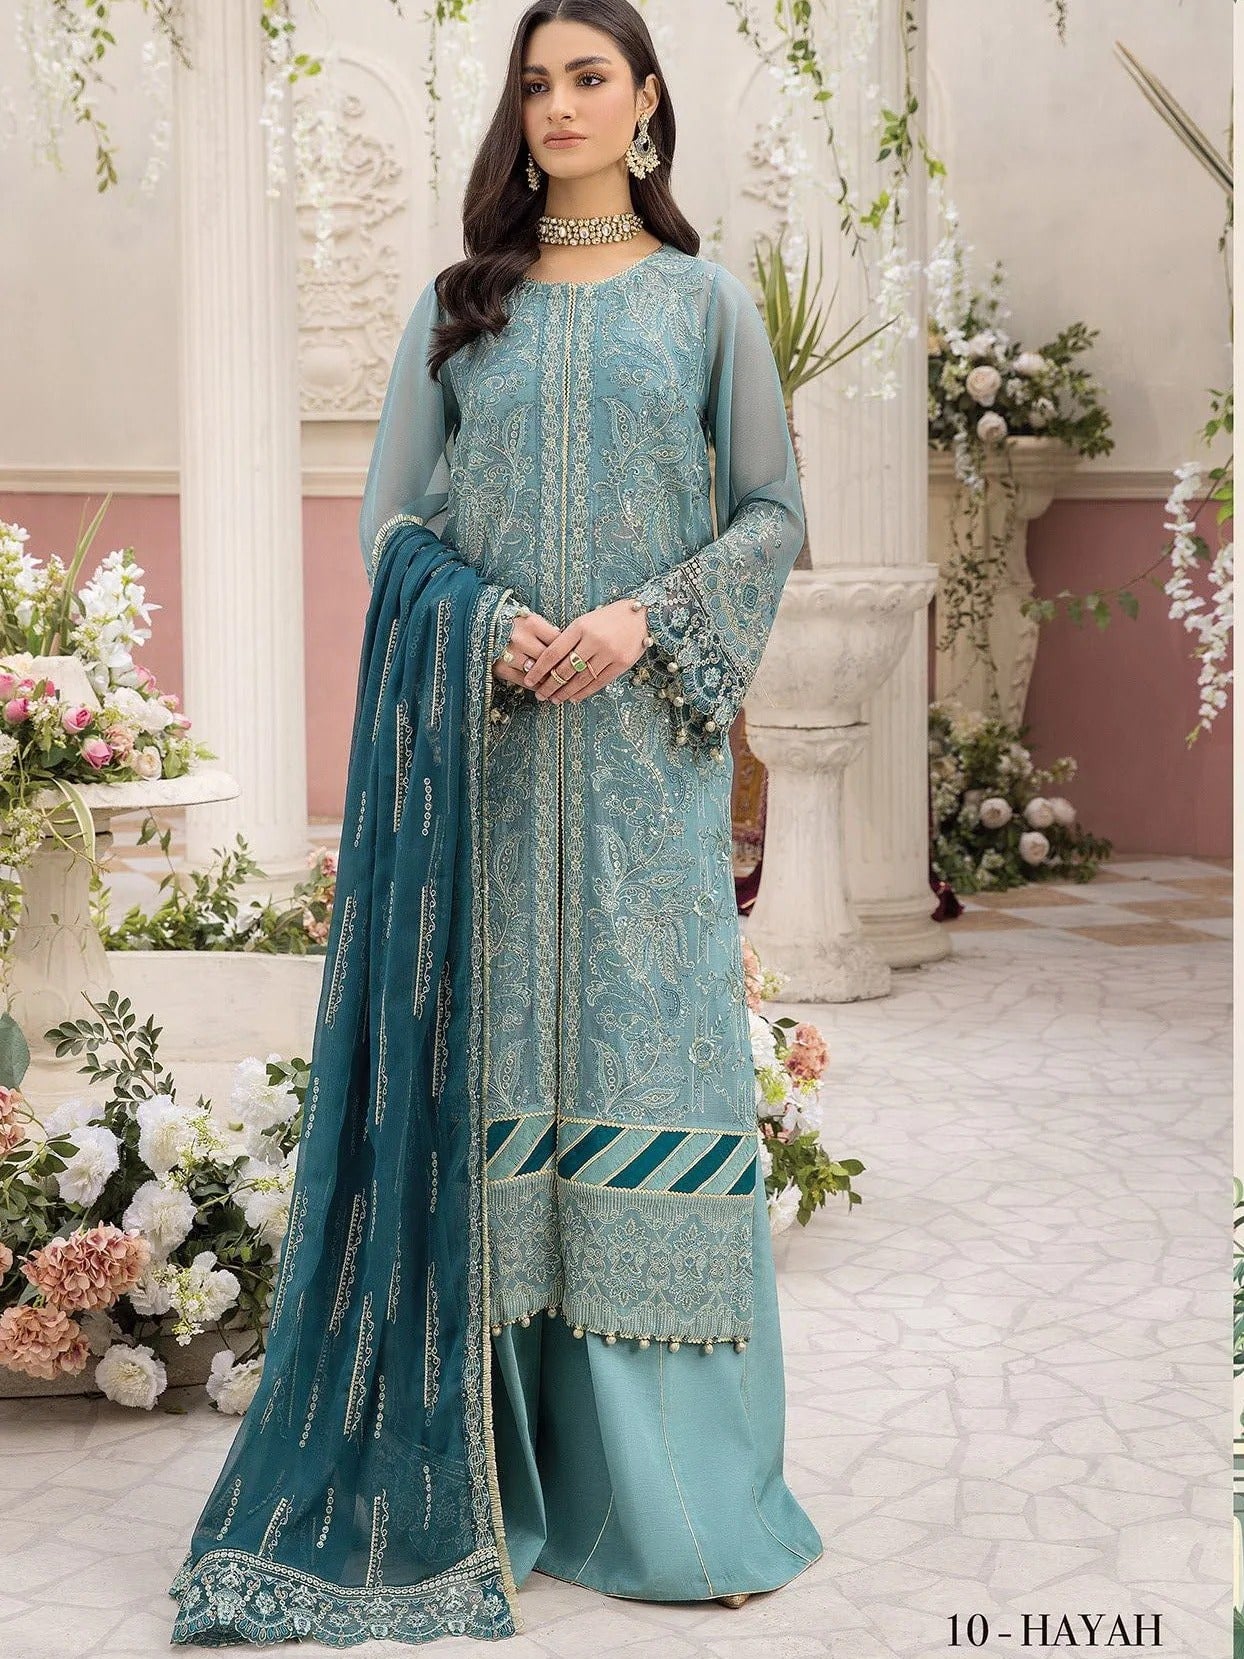 Formal Collection - Xenia - Ishya - Luxury - D#10 - Hayah available at Saleem Fabrics Traditions